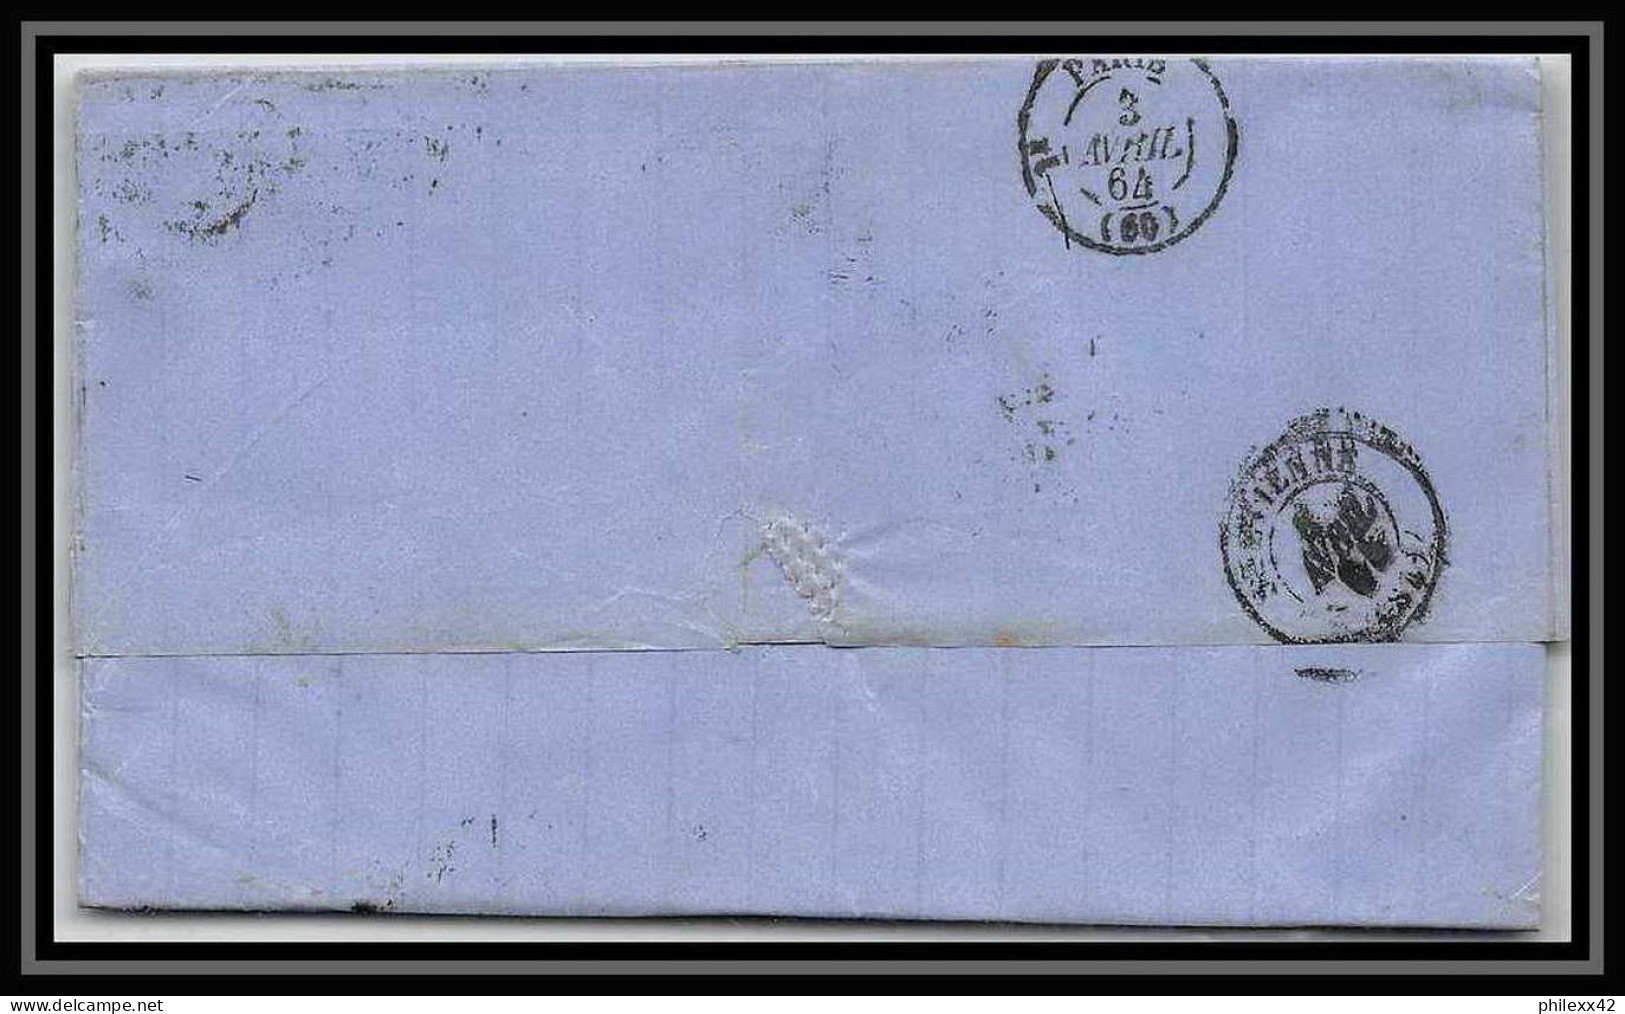 35751 N°32 Victoria 4p Red London St Etienne France 1864 Cachet 79 Lettre Cover Grande Bretagne England - Covers & Documents